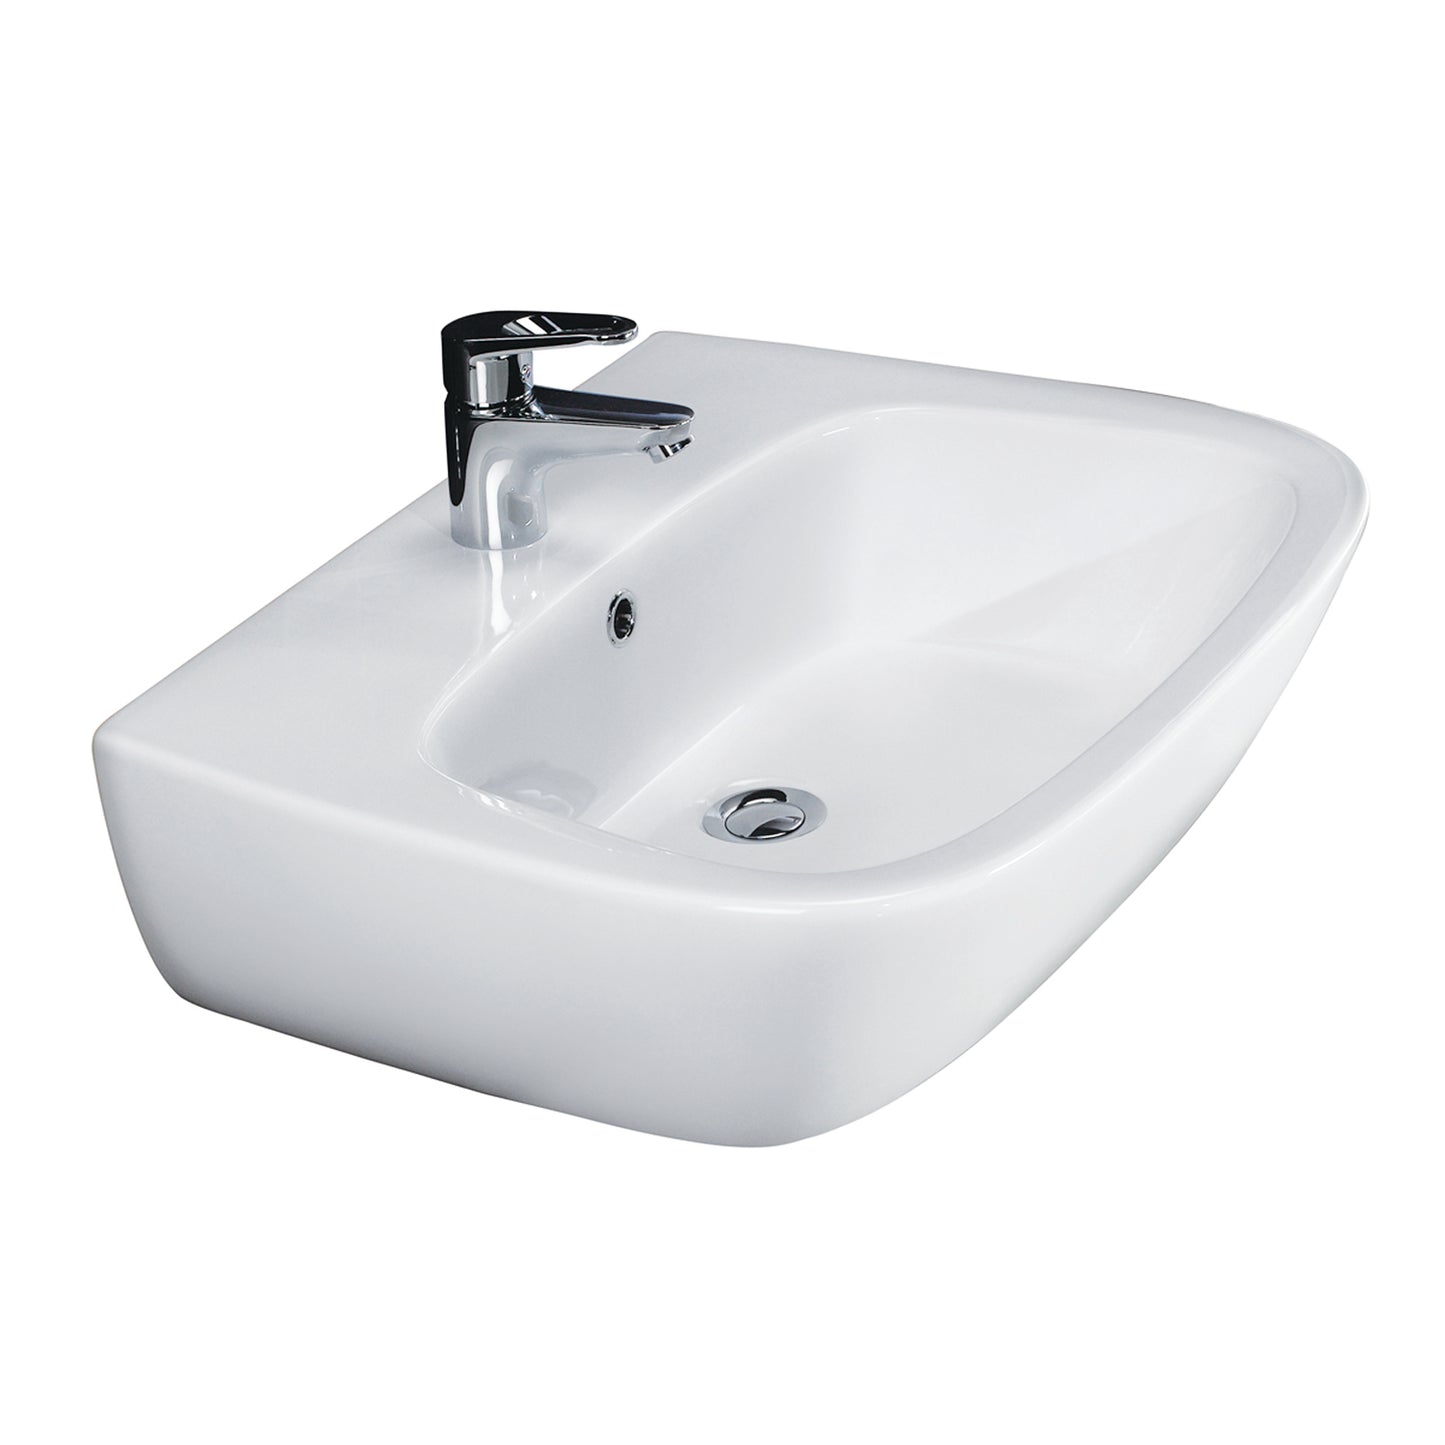 Elena 500 Wall Hung Bathroom Sink in White with 1 Faucet Hole